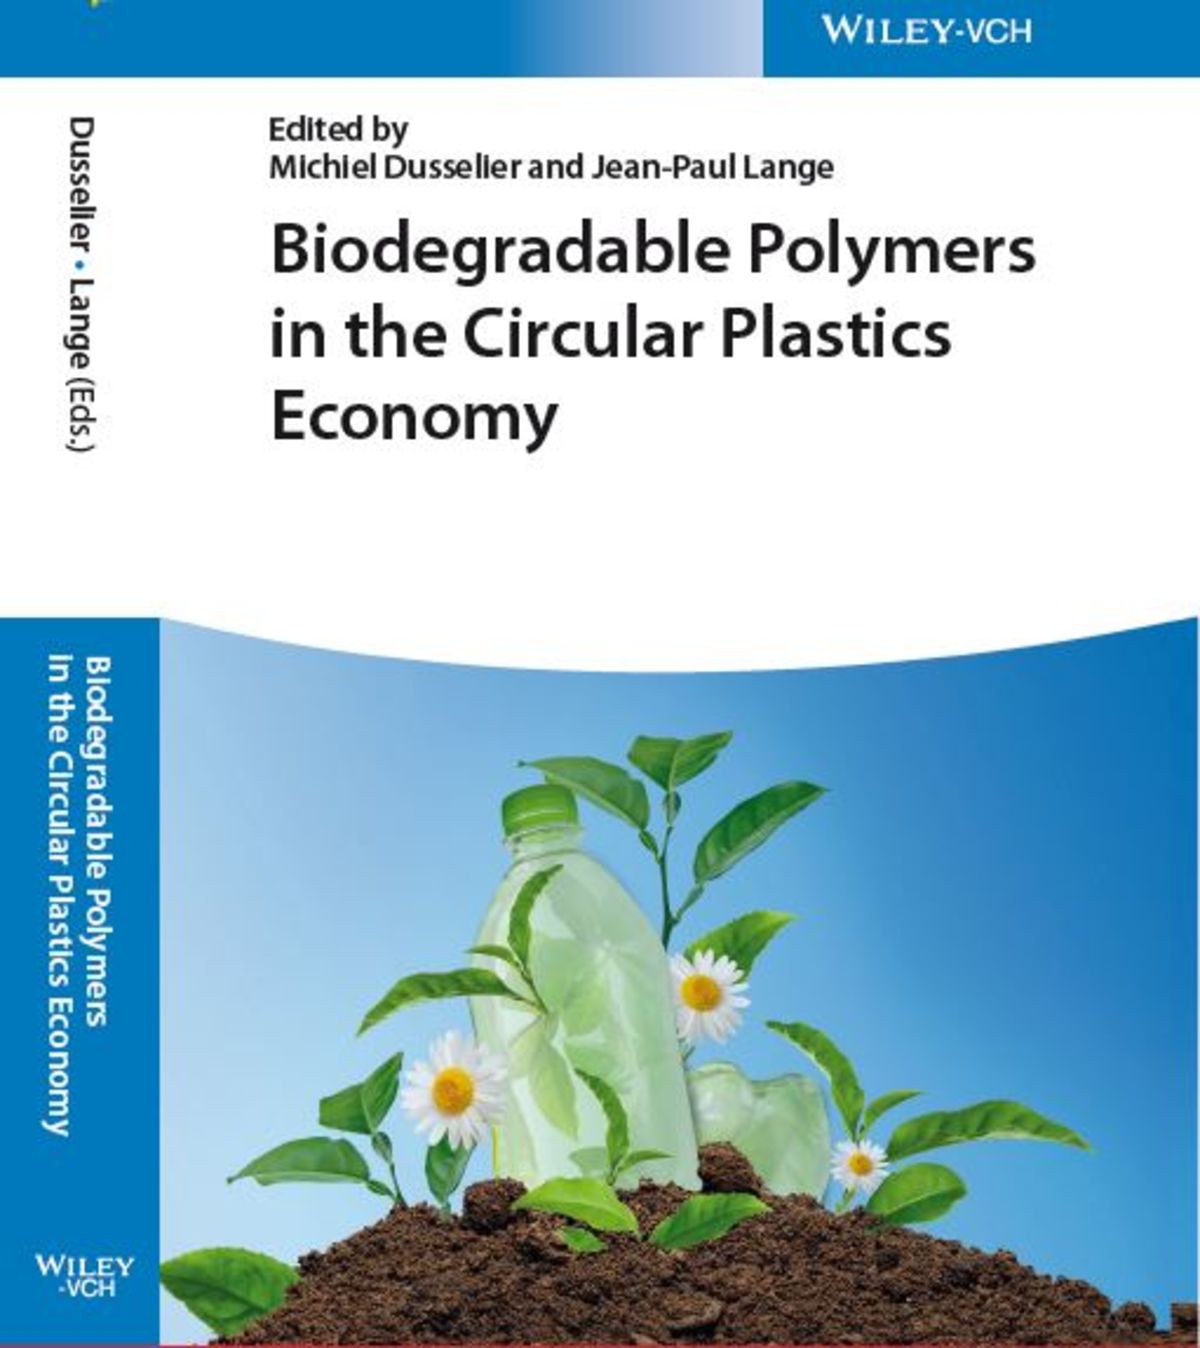 BOOK: Biodegradable Polymers in the Circular Plastics Economy